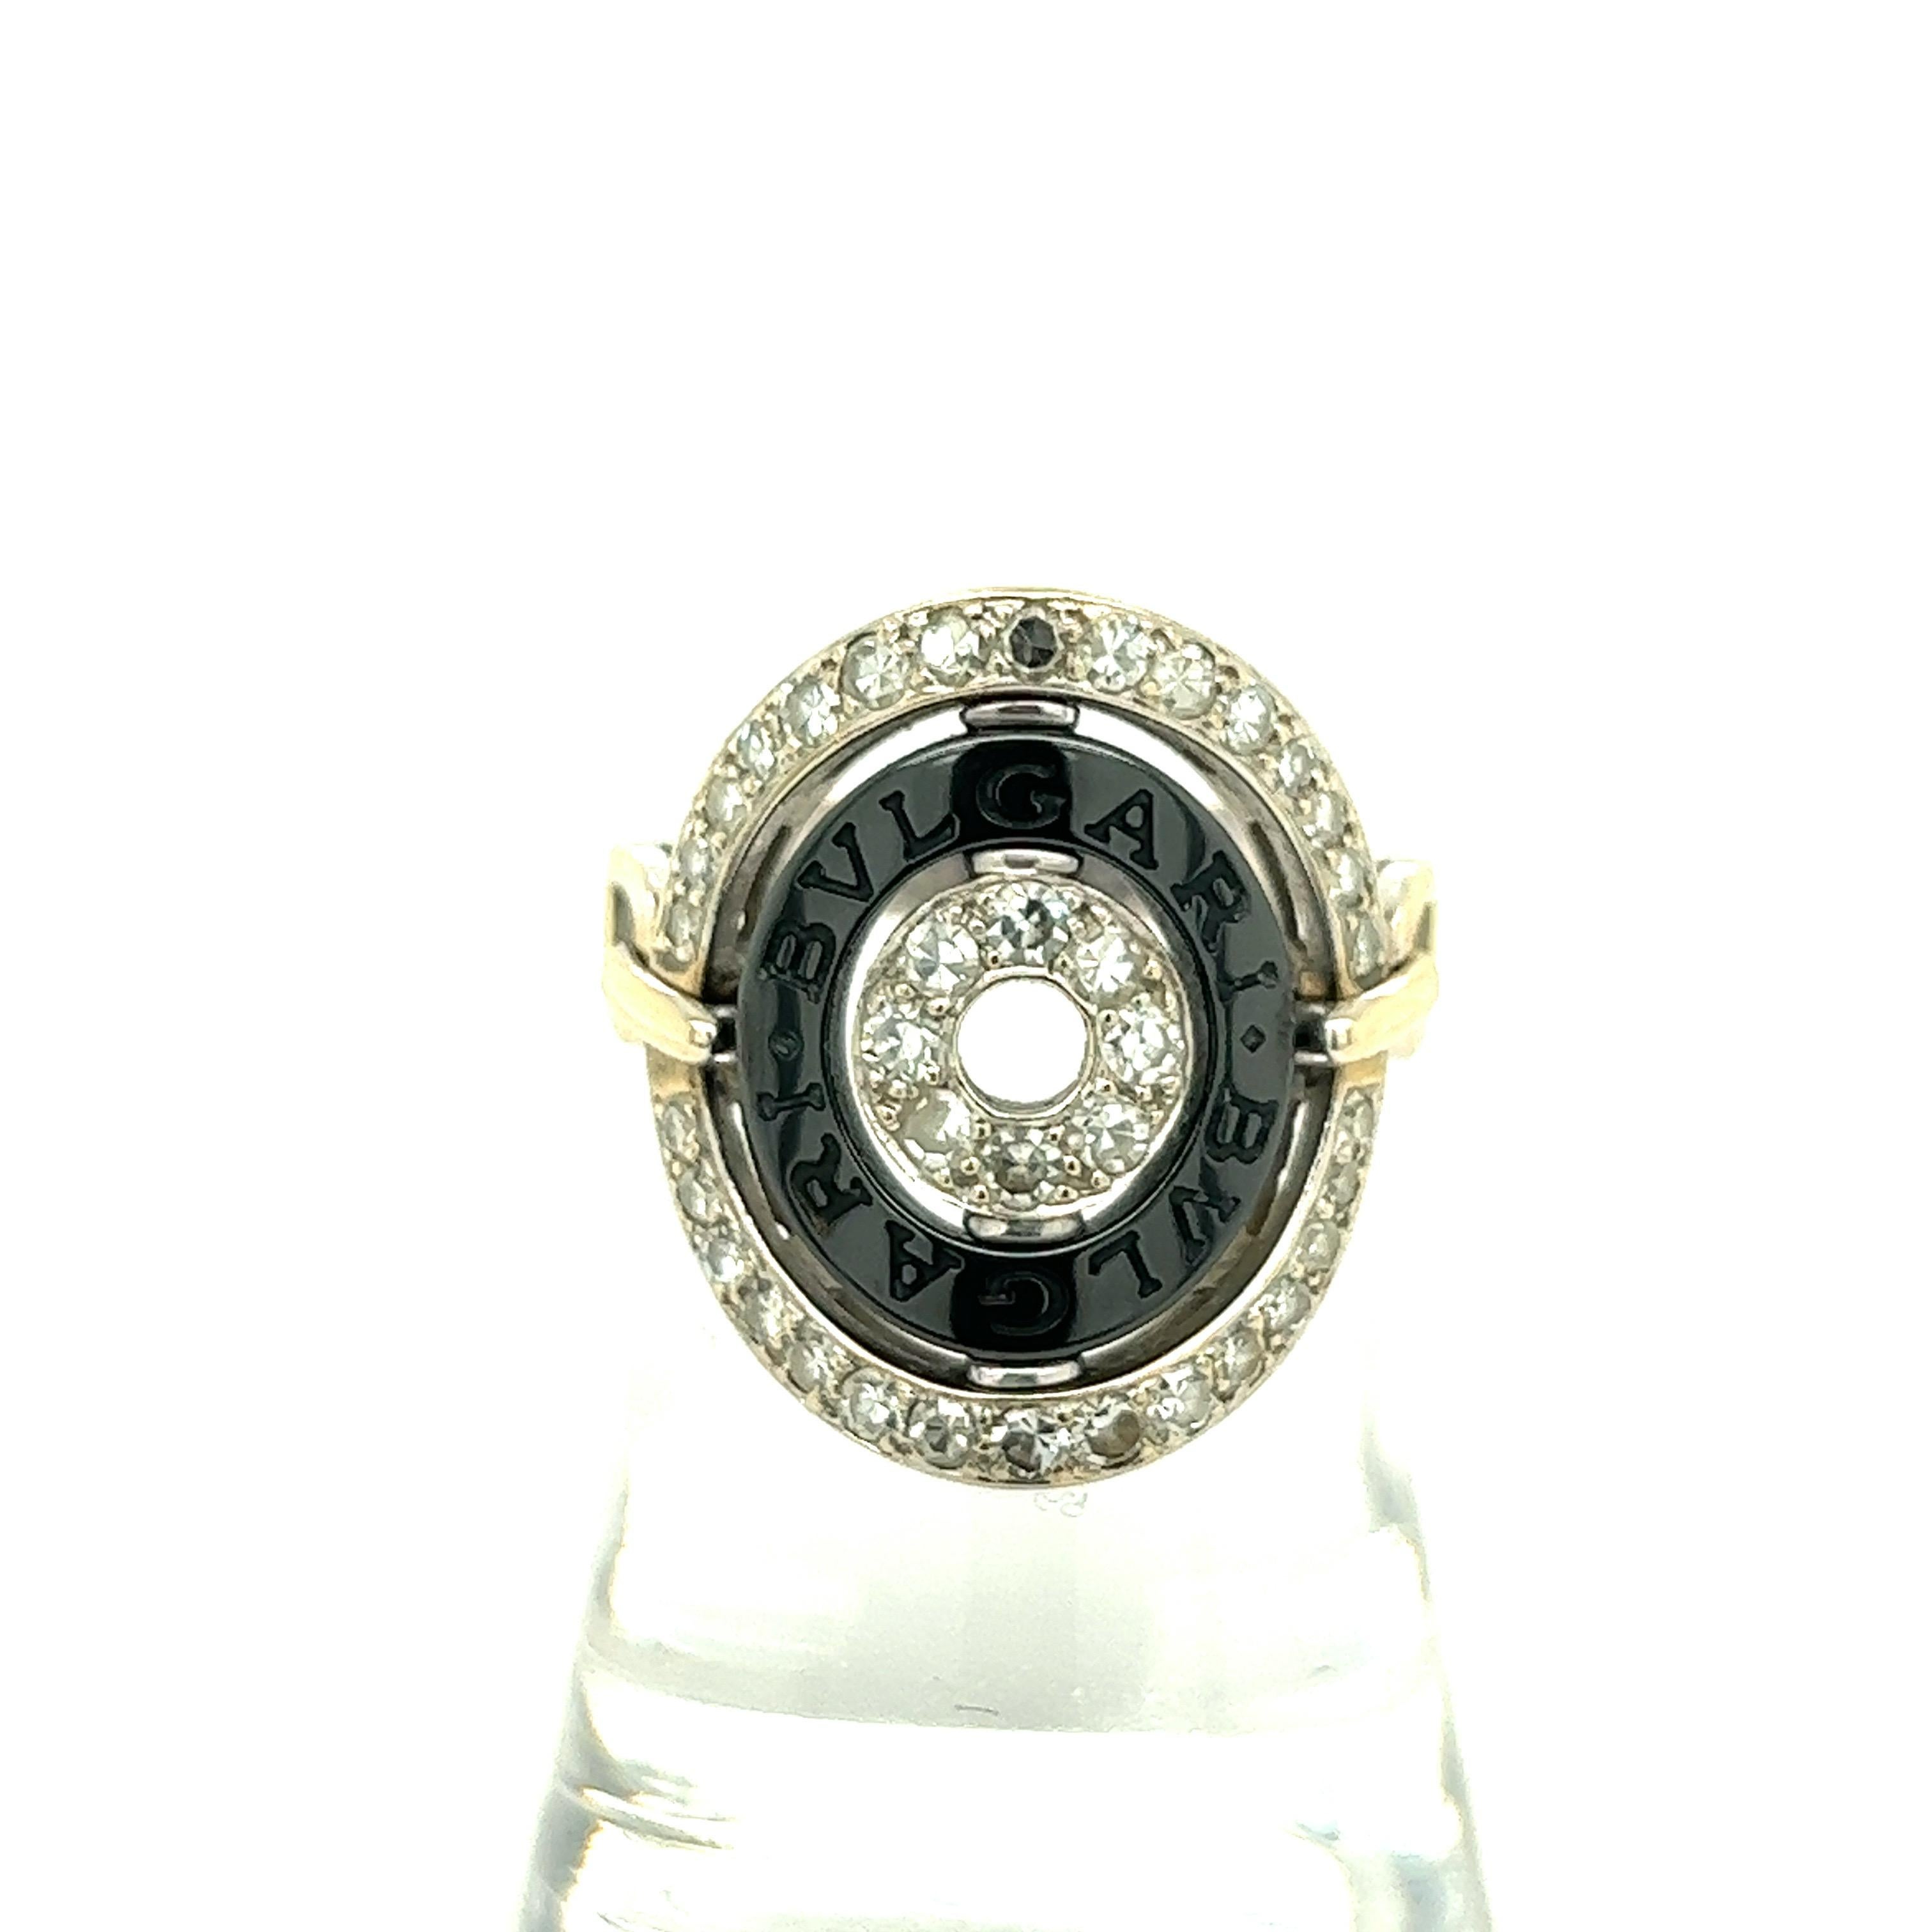 Bvlgari Astrale Movable 18k White Gold Diamond Ring

Thirty eight round brilliant-cut diamonds of approximately 1 carat total, set on 18 karat white gold, accented by a middle ring of blackened ceramic; marked Bvlgari, Bvlgari, 750, Made in